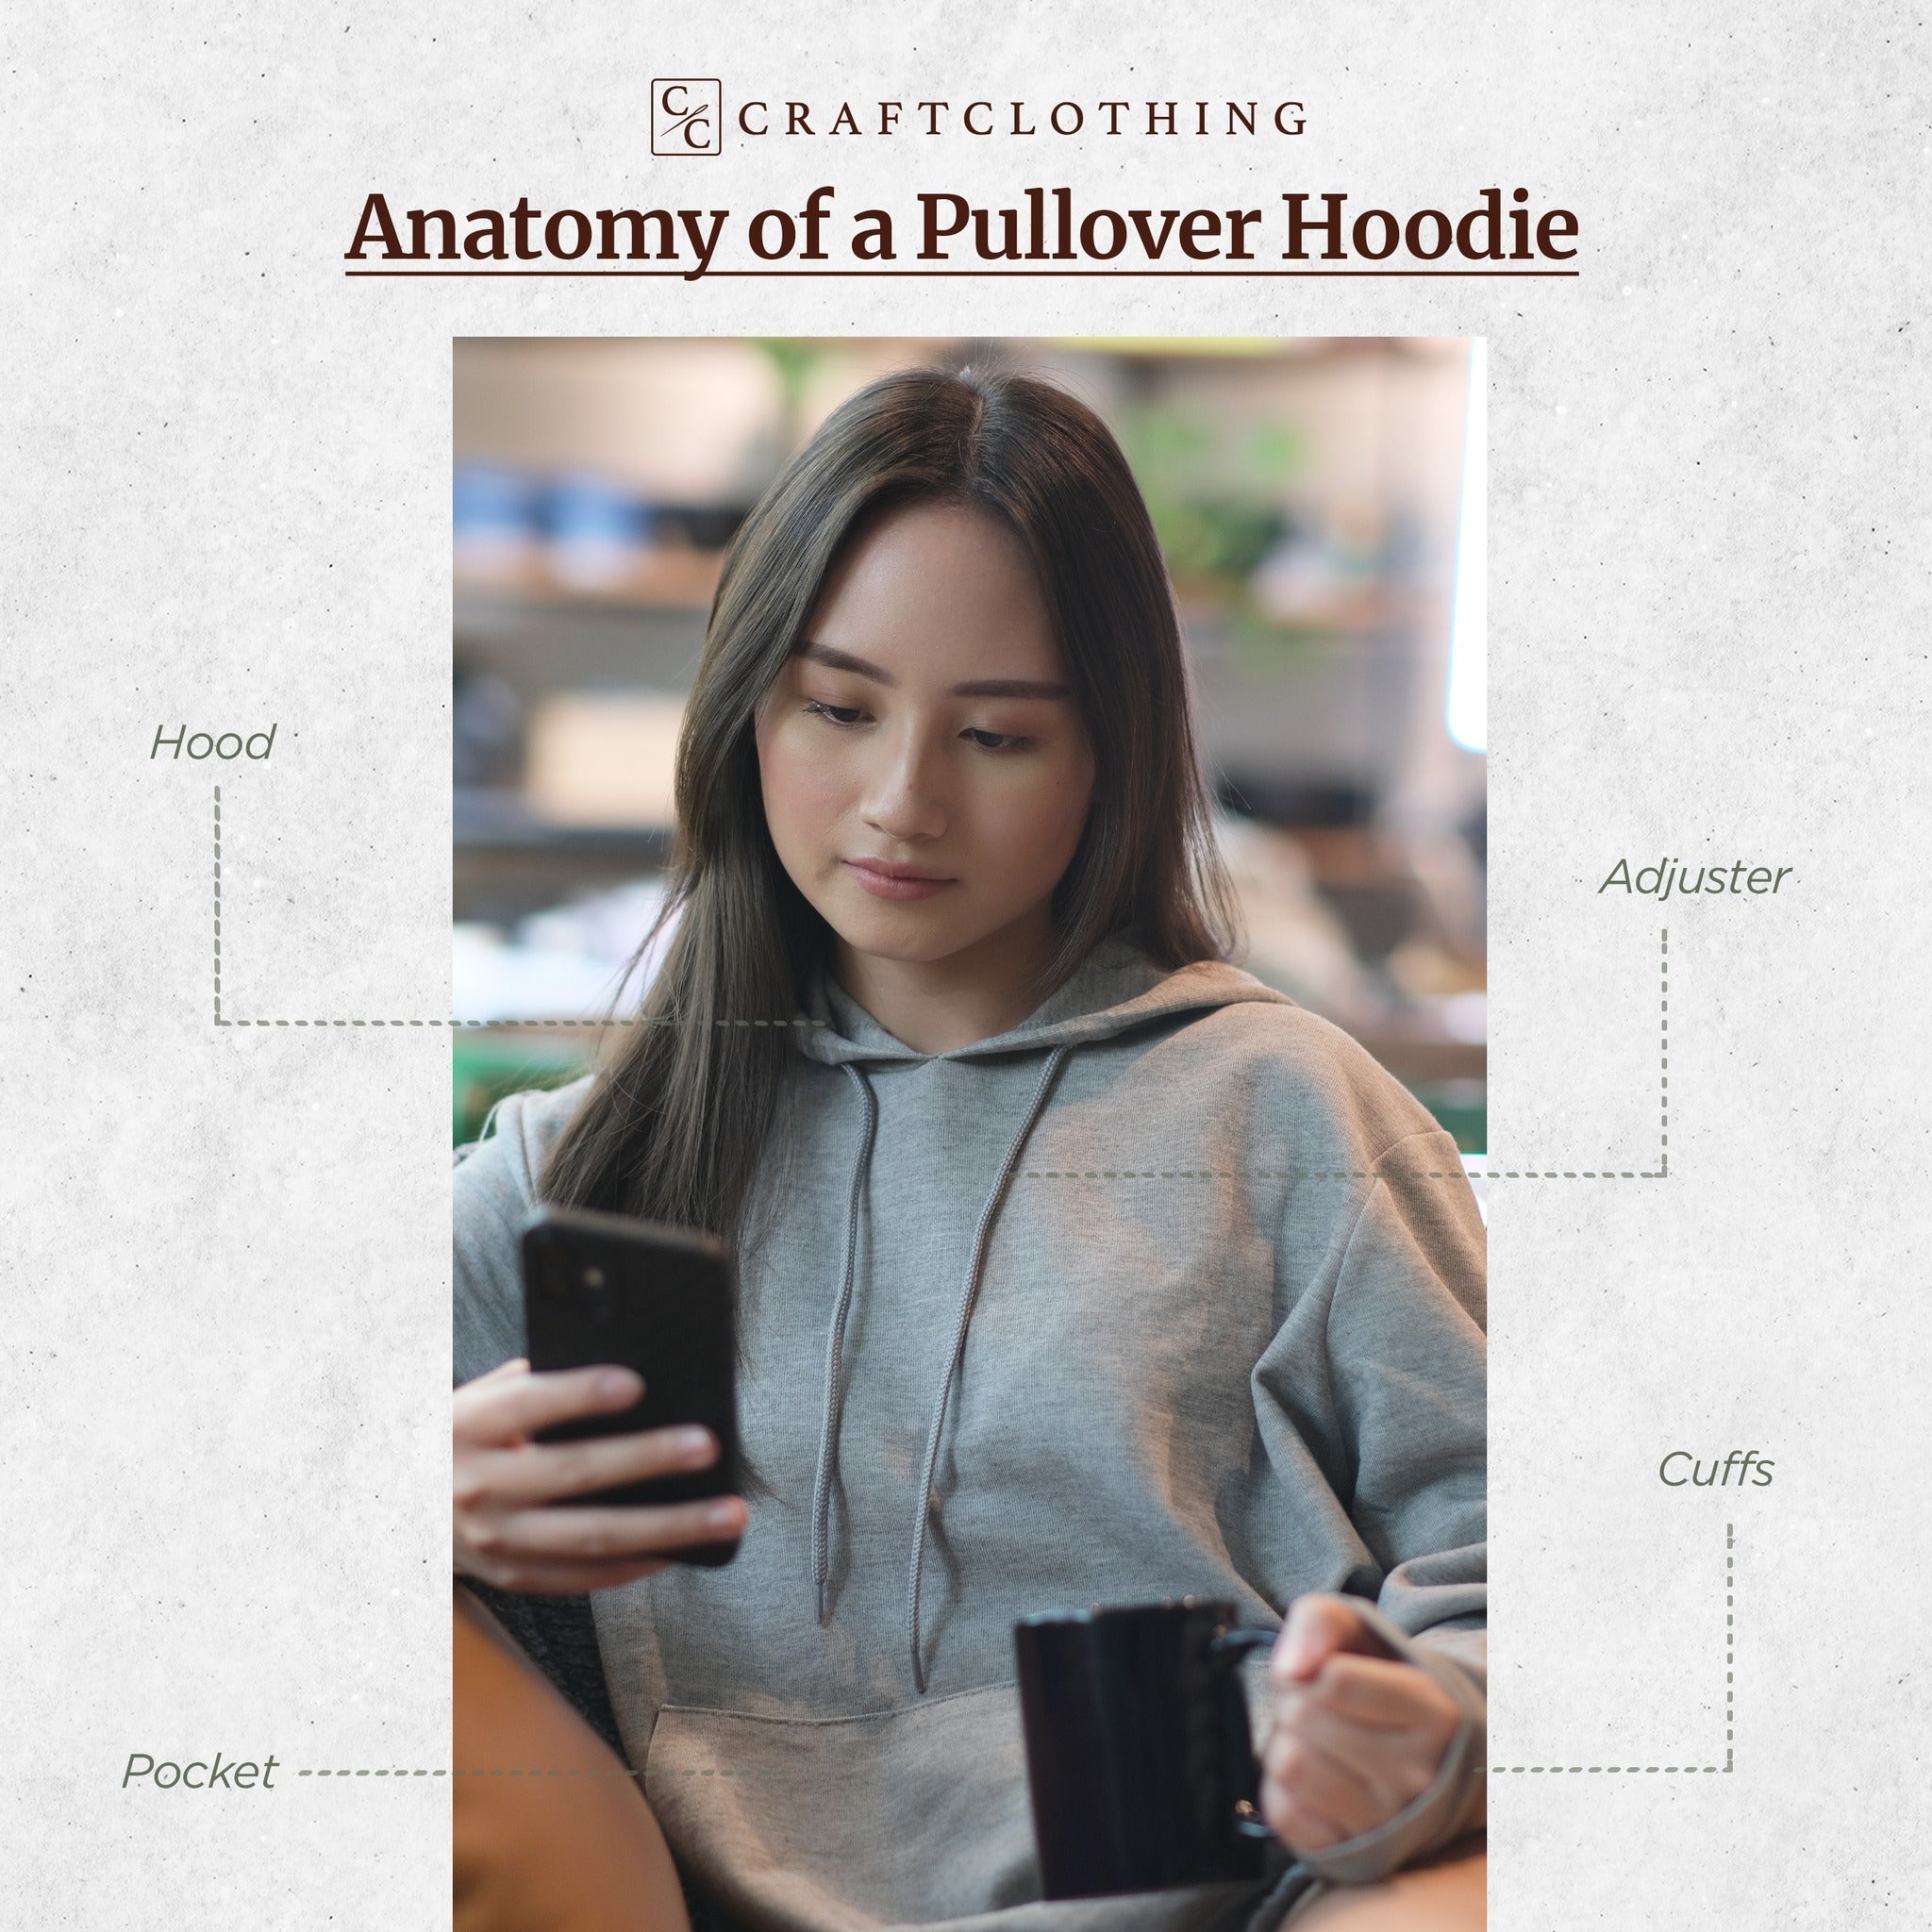 Anatomy of a Pullover Hoodie